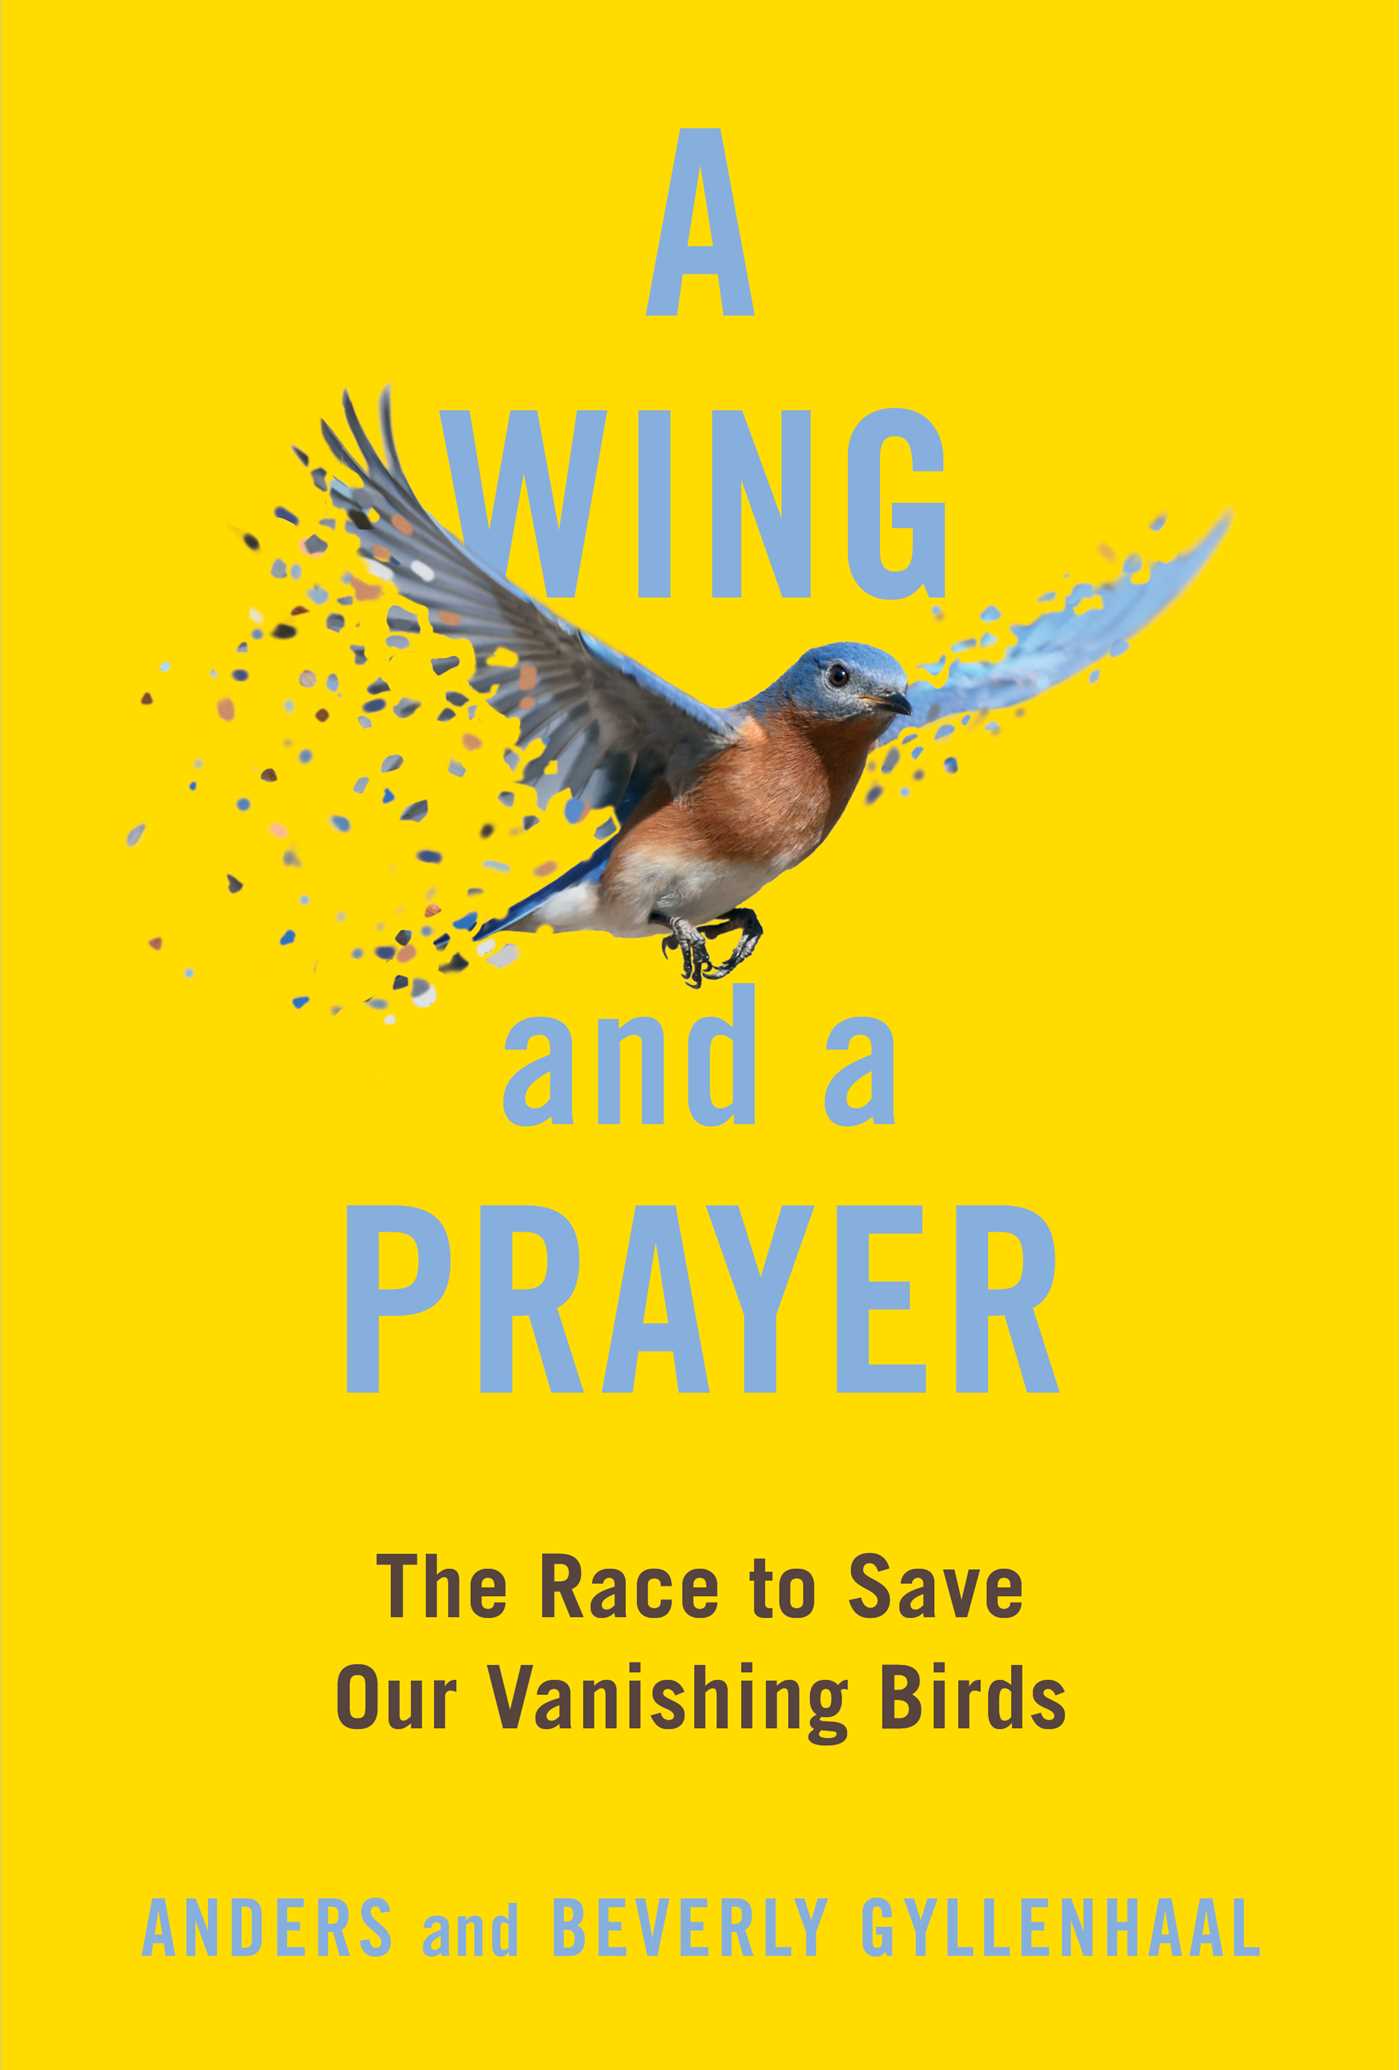 Image for "A Wing and a Prayer"